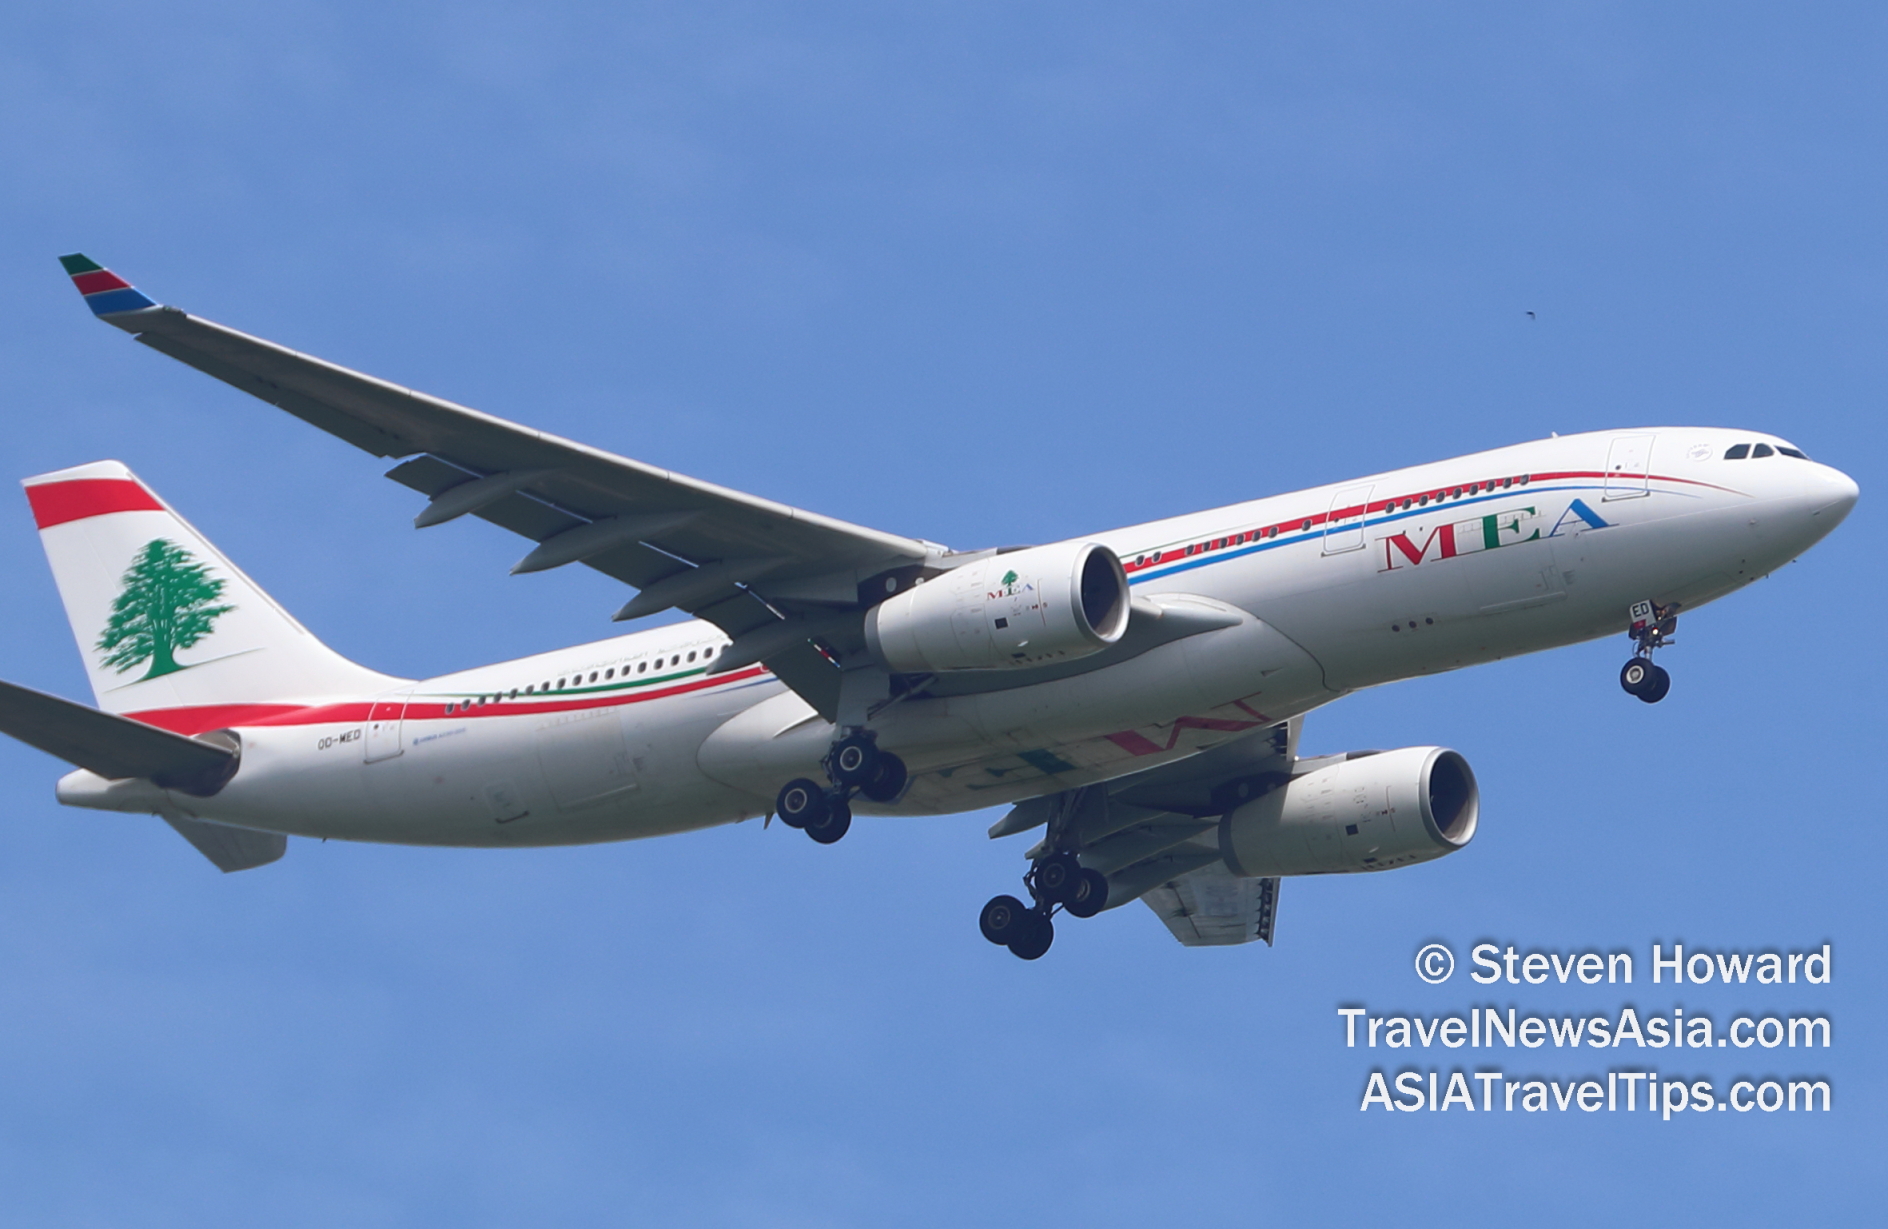 Middle East Airlines A330 reg: OD-MED. Picture by Steven Howard of TravelNewsAsia.com Click to enlarge.